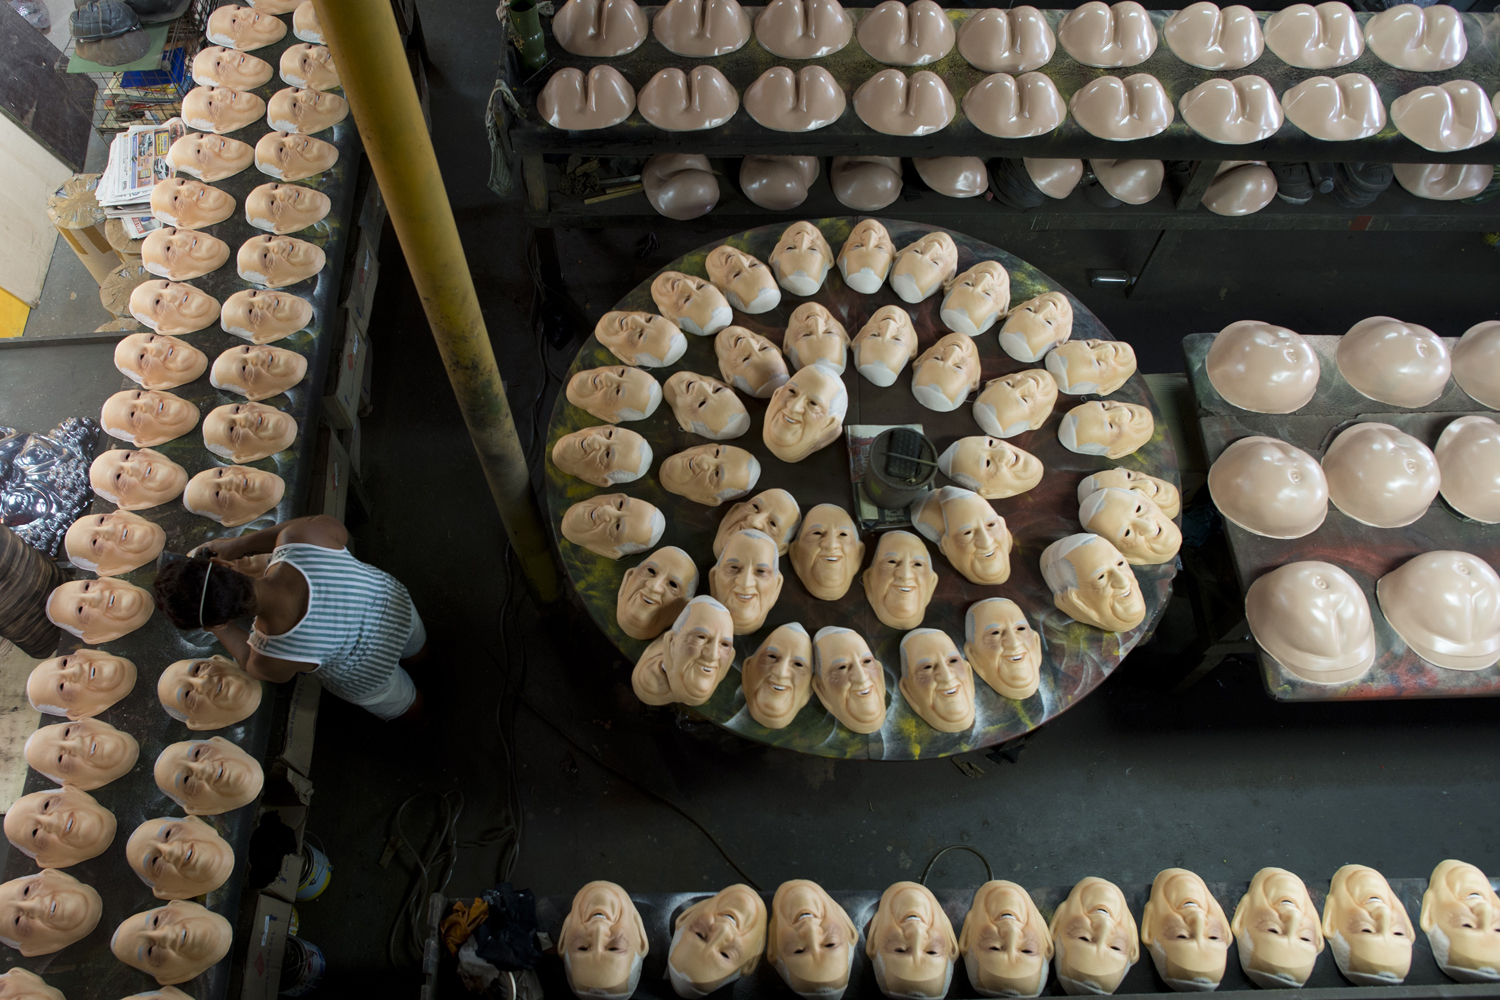 April 17, 2013. A woman paints masks representing Pope Francis in a factory in Niteroi, 20 Km from Rio de Janeiro, Brazil.